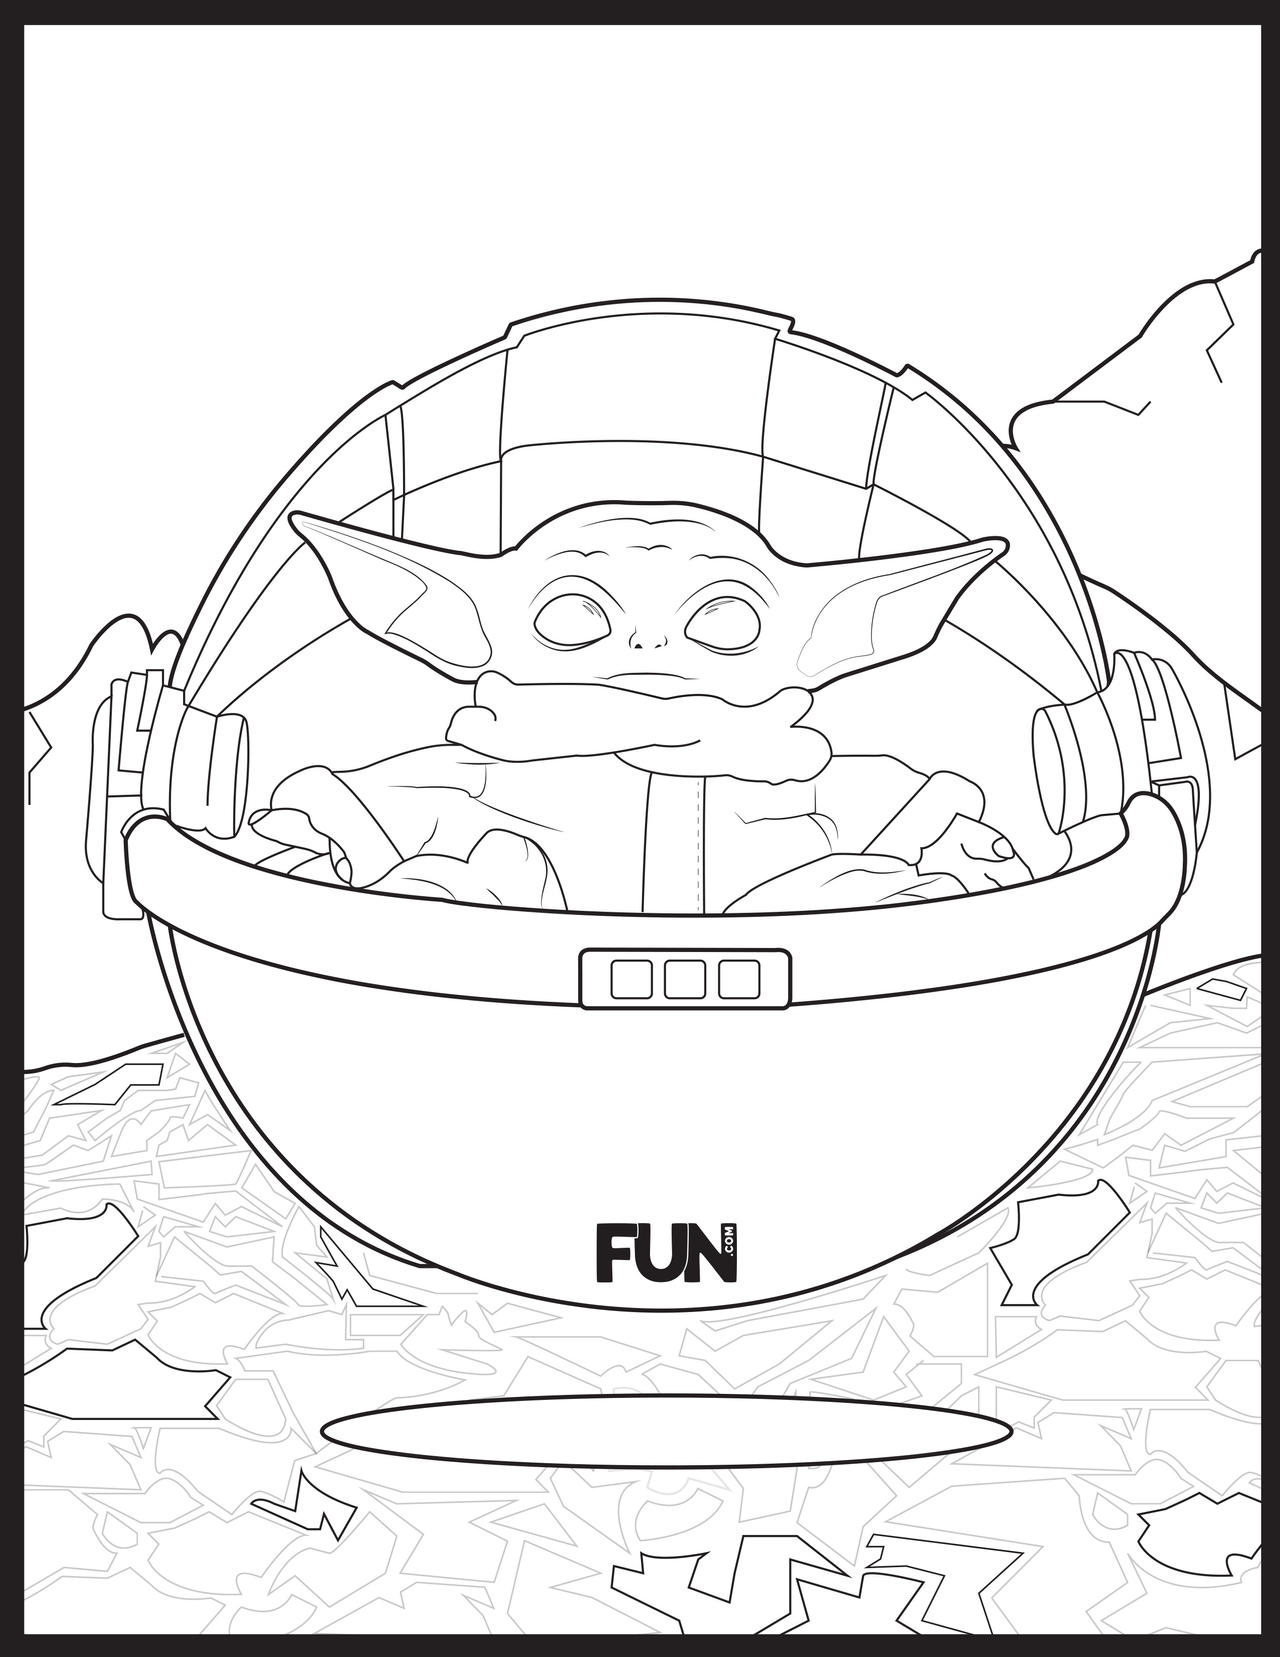 Star wars coloring pages by coloringpageswk on